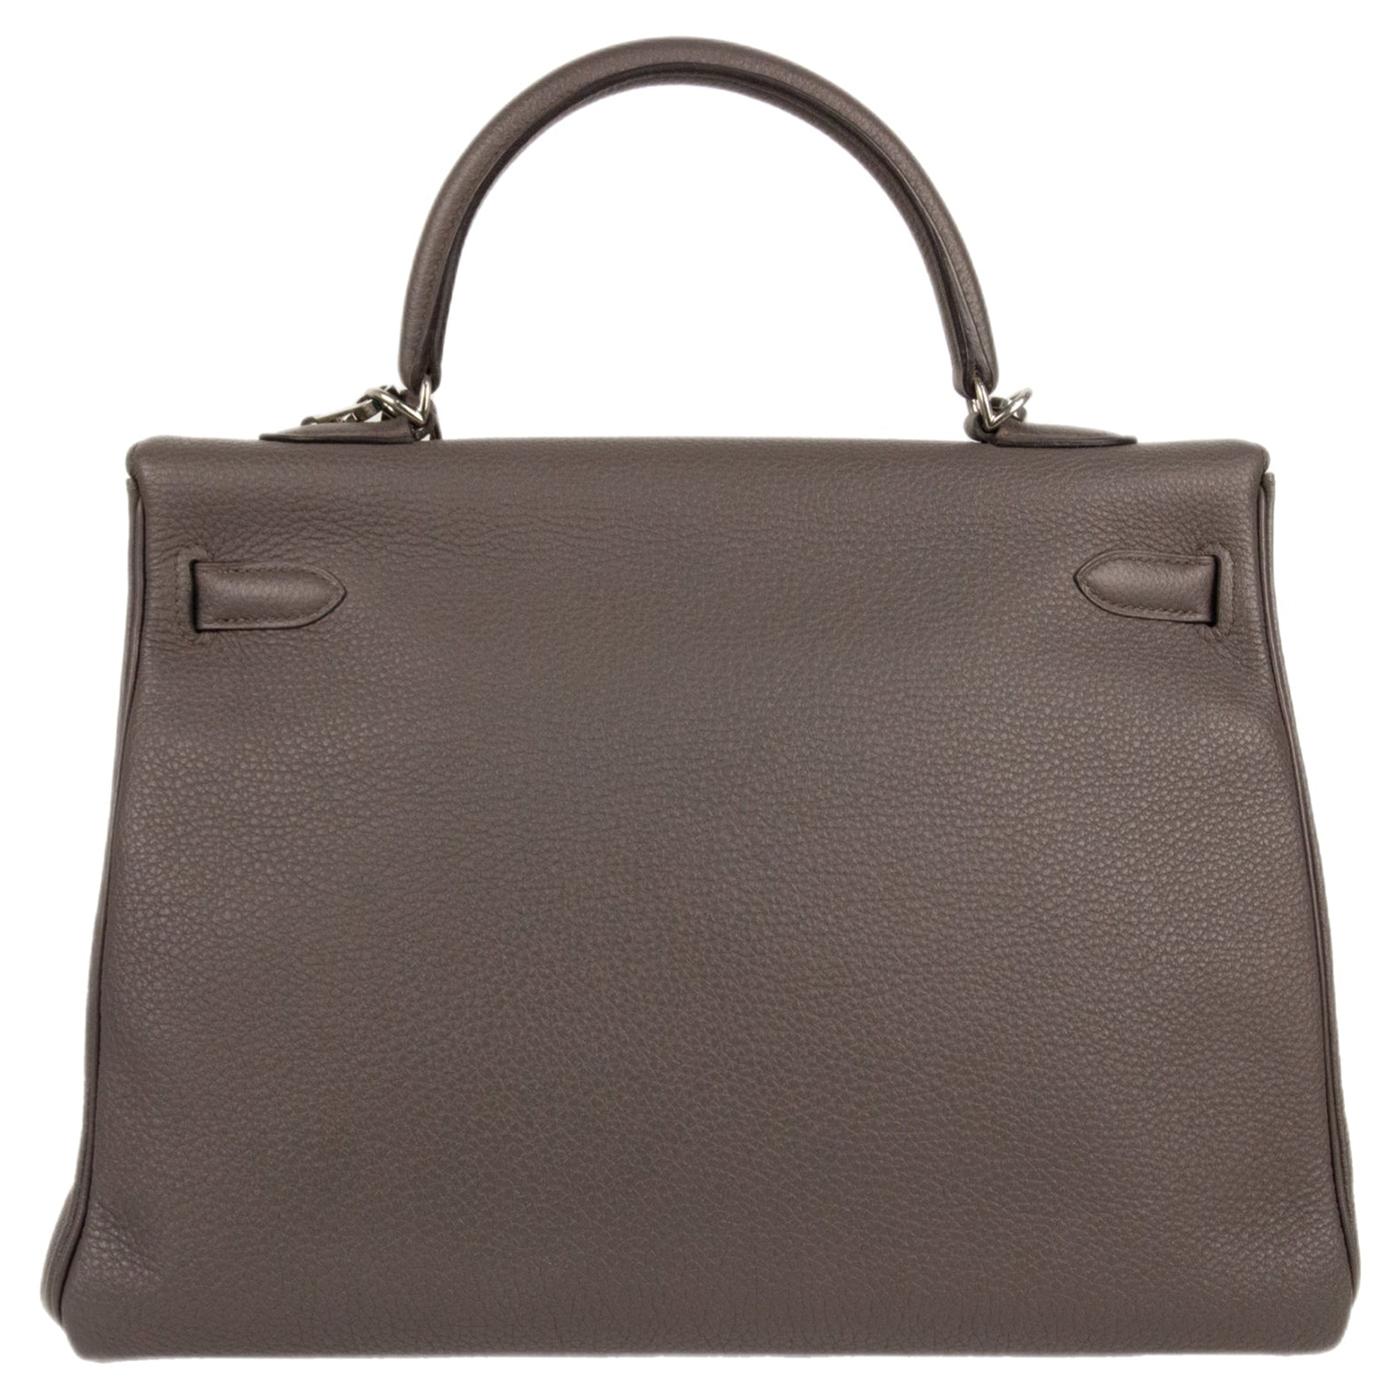 This Kelly, in the Retourne style, is in Etain Togo leather with gold hardware, Today, the Kelly bag from Hermes, designed in a gorgeous trapezoid shape and made with the most luxurious leathers and skins, is worn on the arms of celebrities and